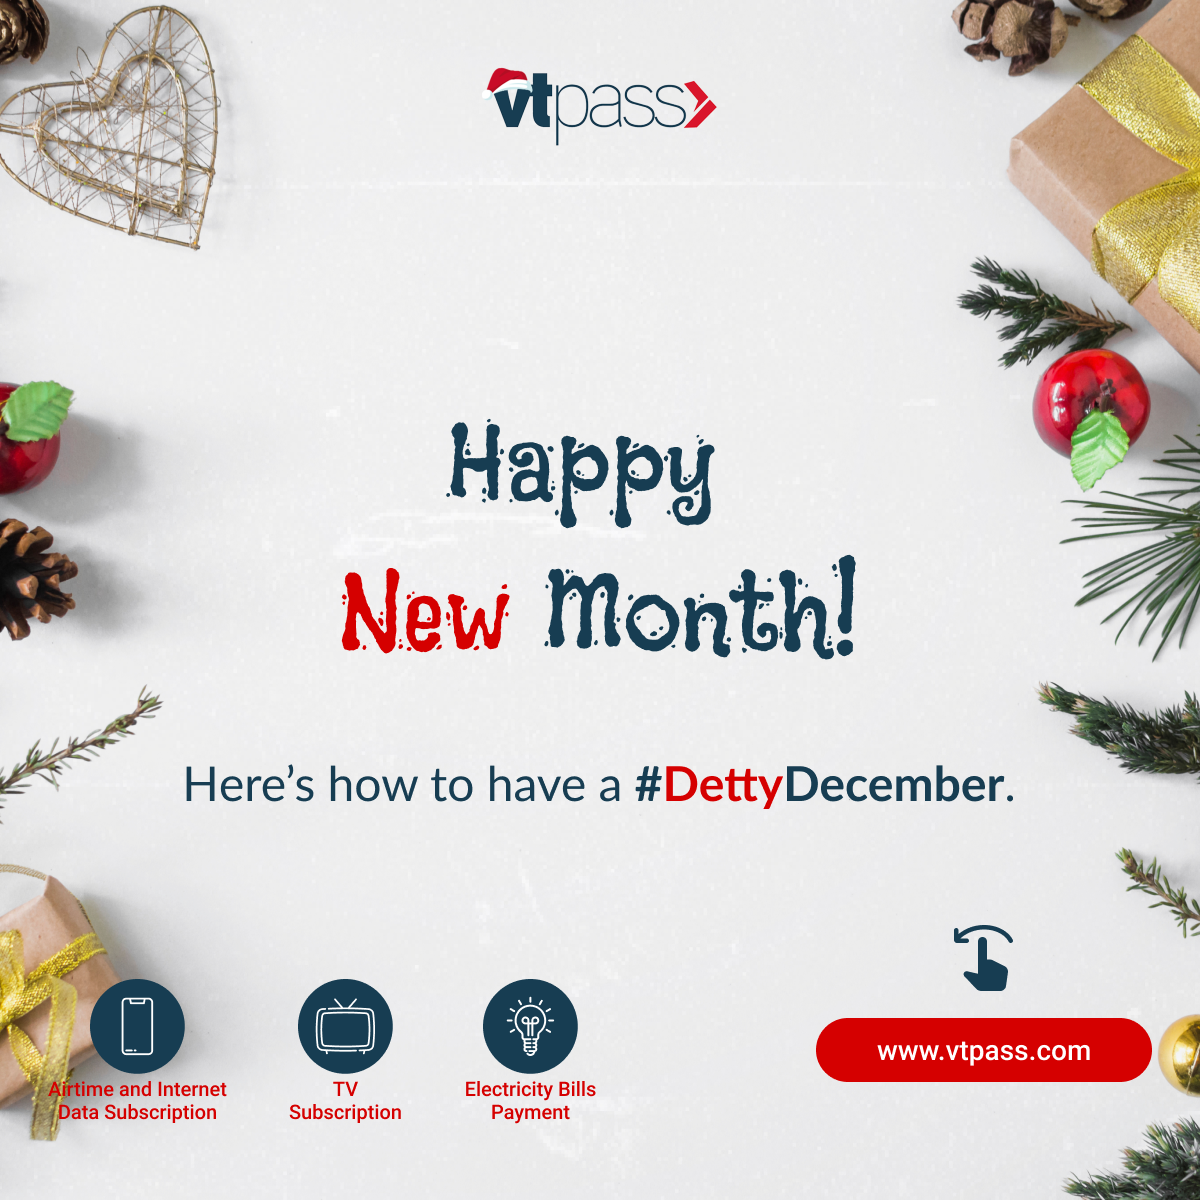 How To Have A Detty December VTpass Blog Everything about Airtime